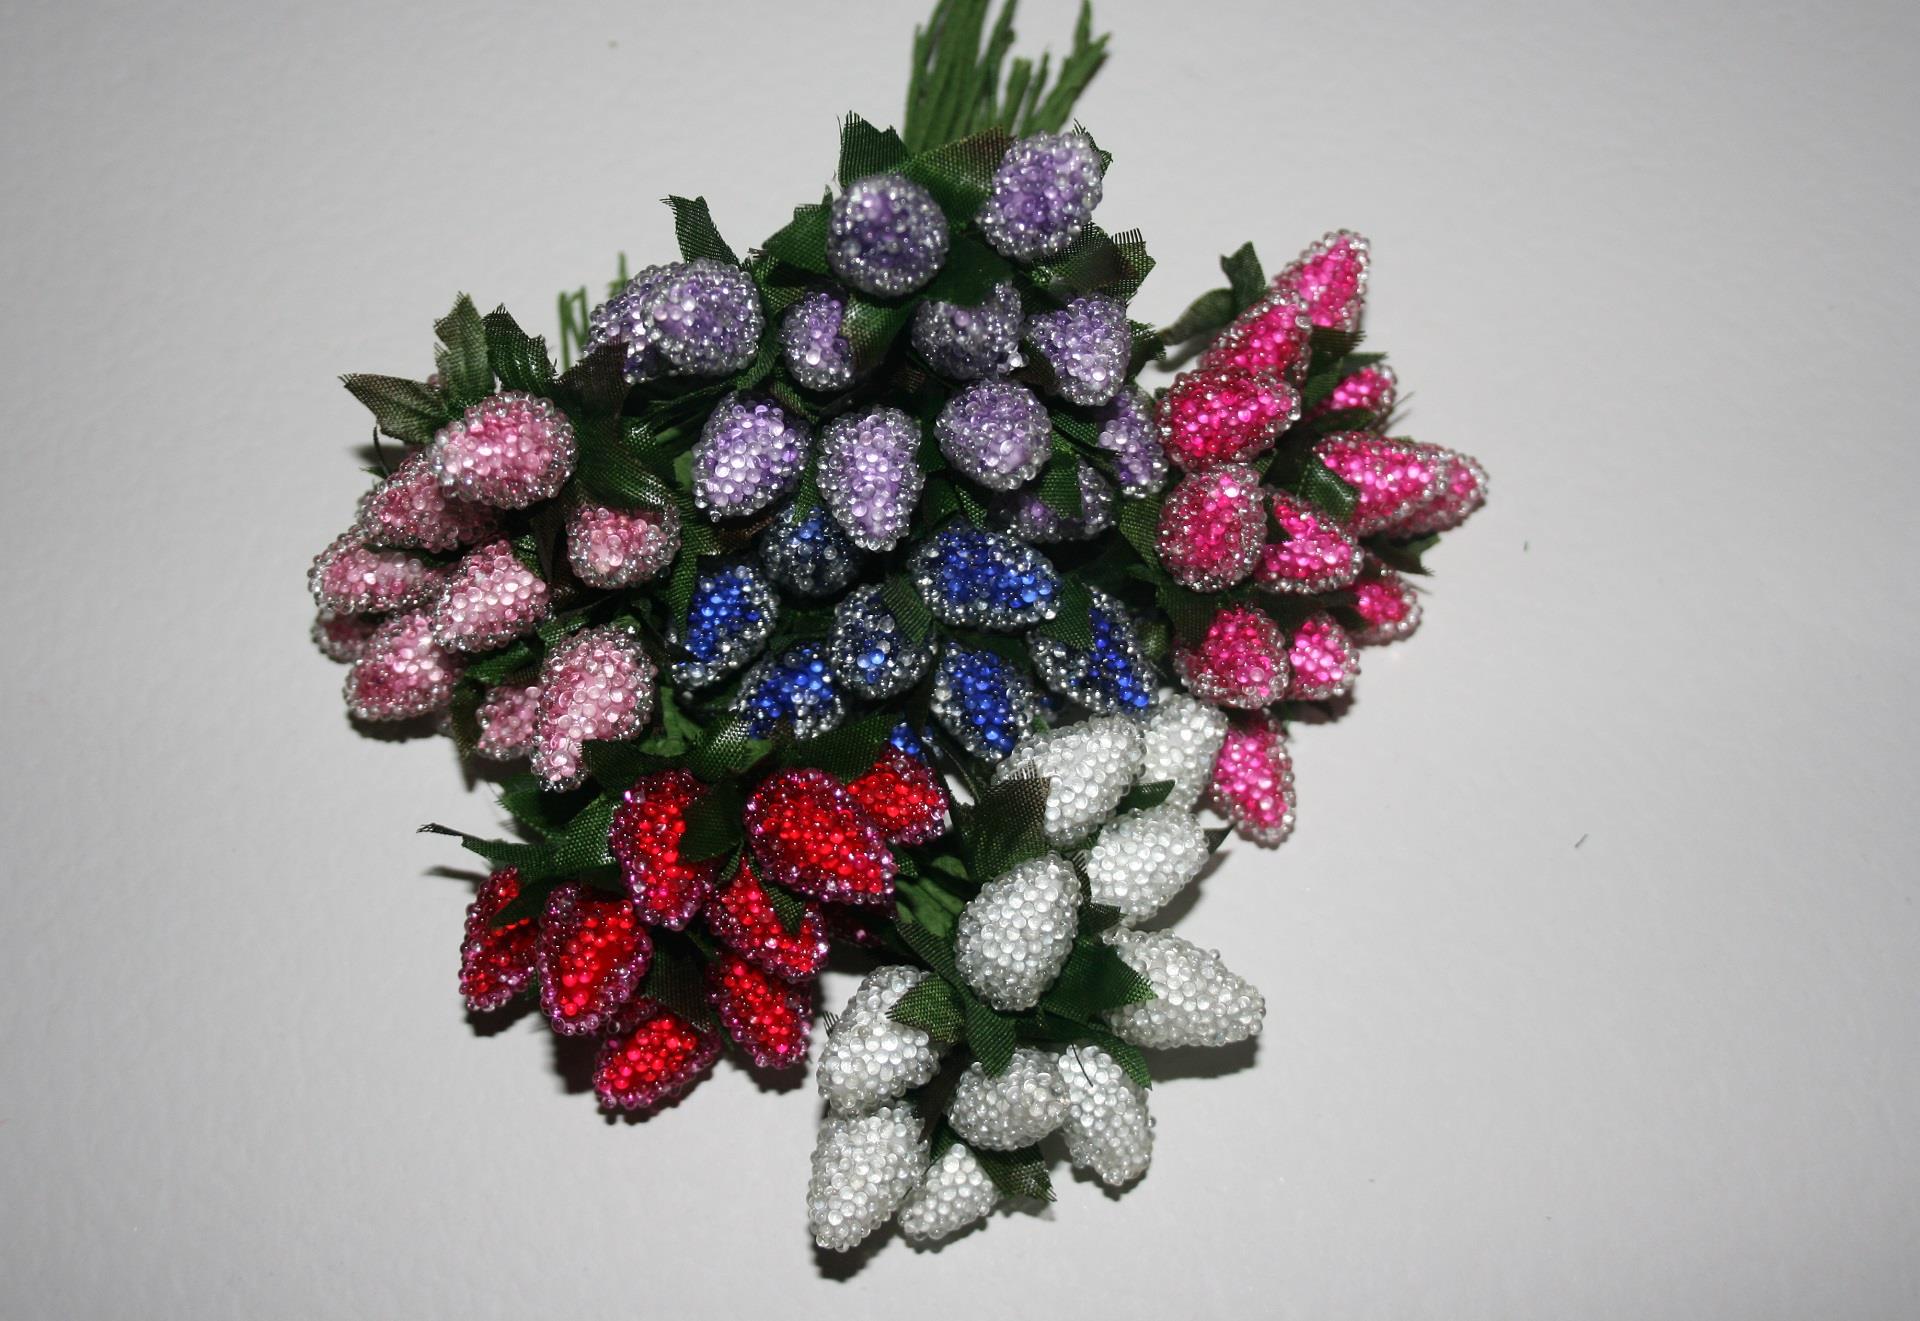 Bunch of Beaded Berries With Leaves & Stems- 5 Colour Choices - Afbeelding 1 van 1